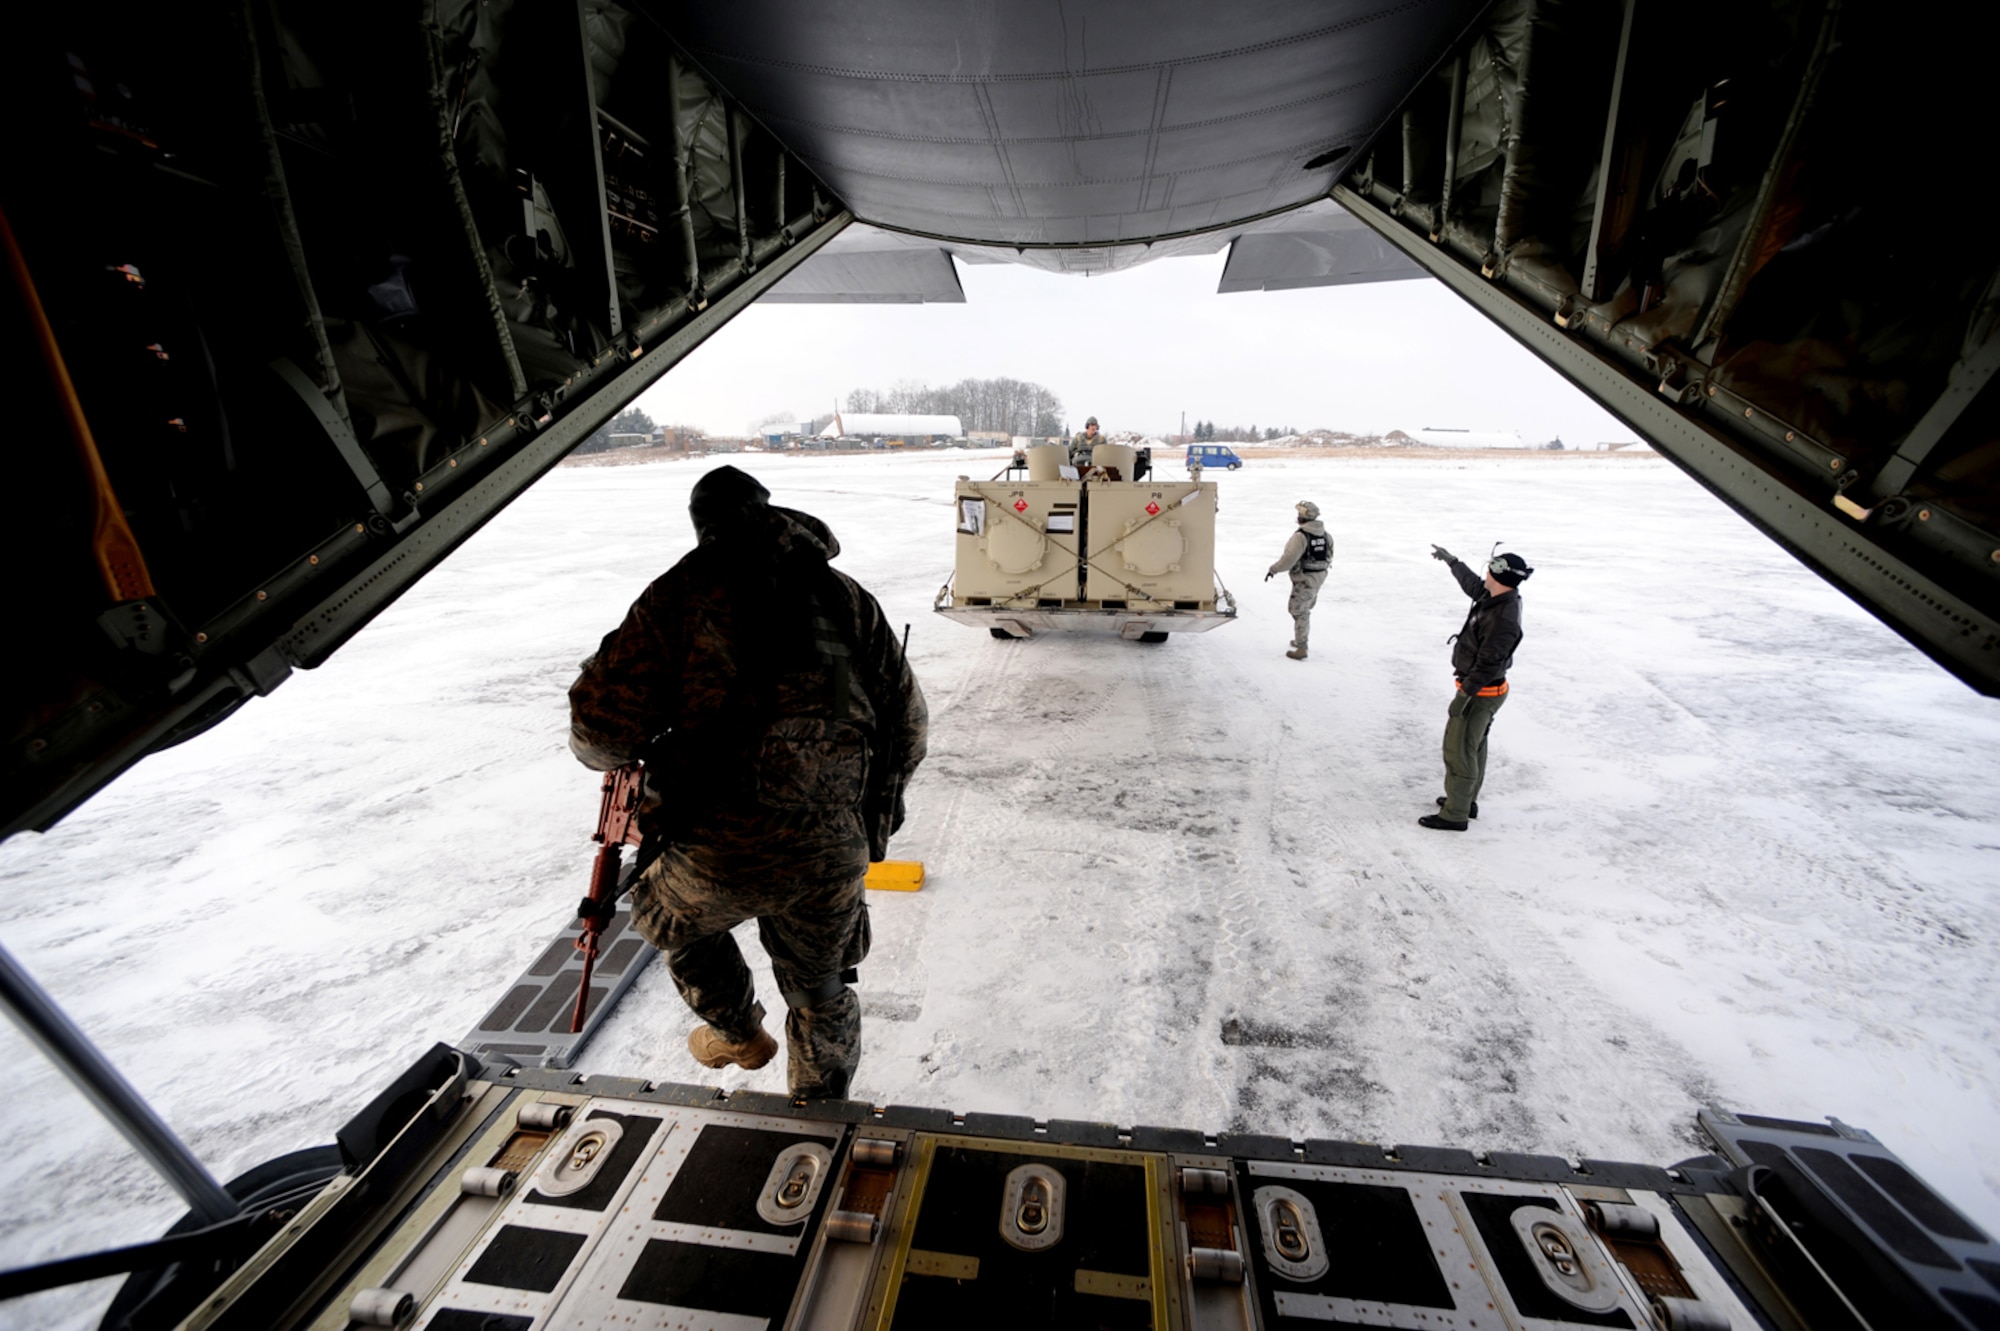 U.S. Air Force members off load cargo from a C-130 Hercules from Ramstein Air Base, Germany, after arriving at Flugplatz Bitburg, Germany, Jan. 26, 2010, in preparation of Ramstein's operational readiness inspection in September. The units are setting up bare-base operations as part of the dual-wing operational readiness exercise with the 86th Airlift Wing. This is the second of five operational readiness exercises. (U.S. Air Force photo by Staff Sgt. Sarayuth Pinthong)